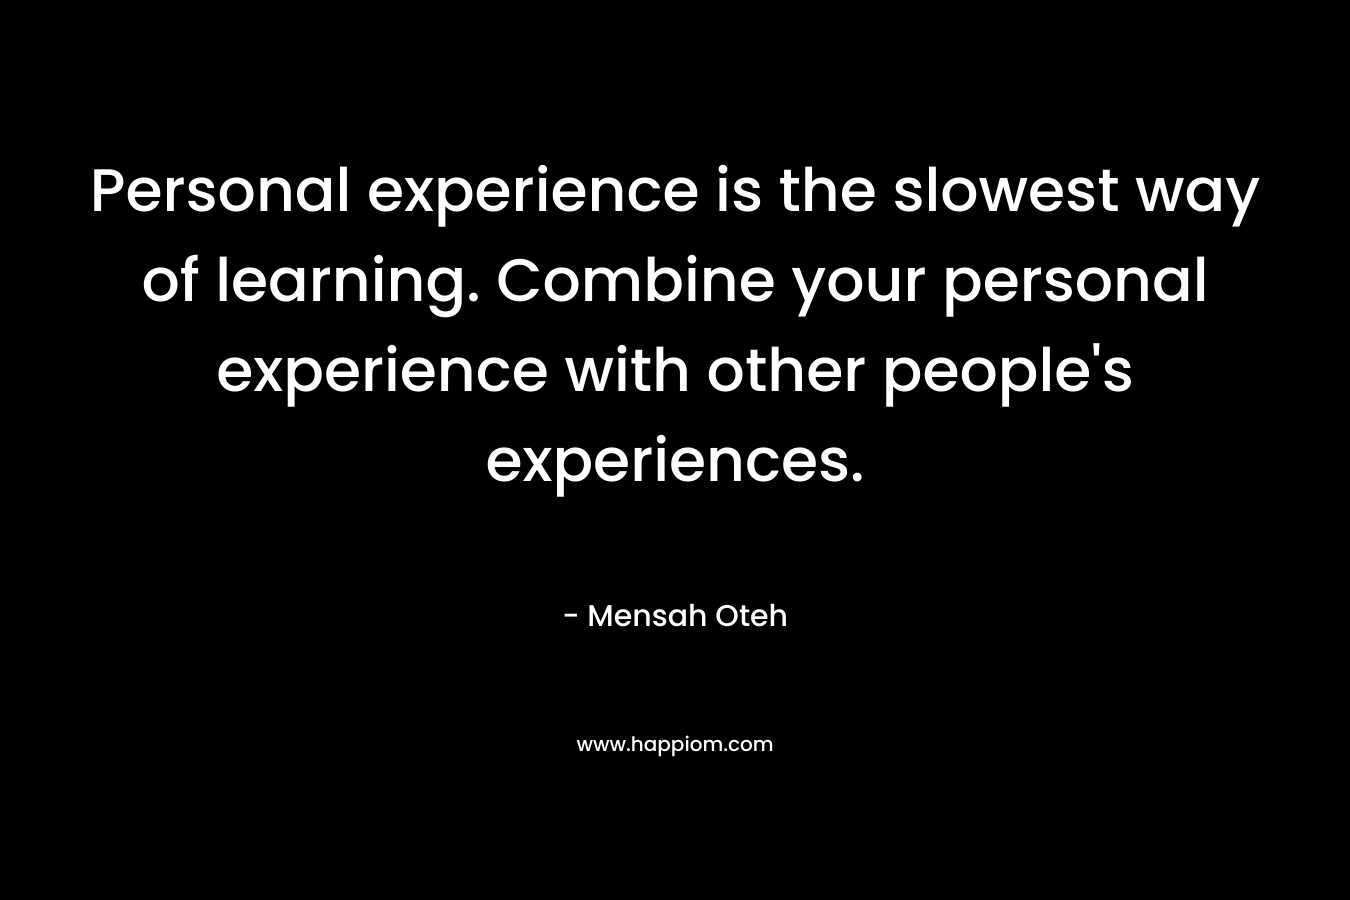 Personal experience is the slowest way of learning. Combine your personal experience with other people's experiences.